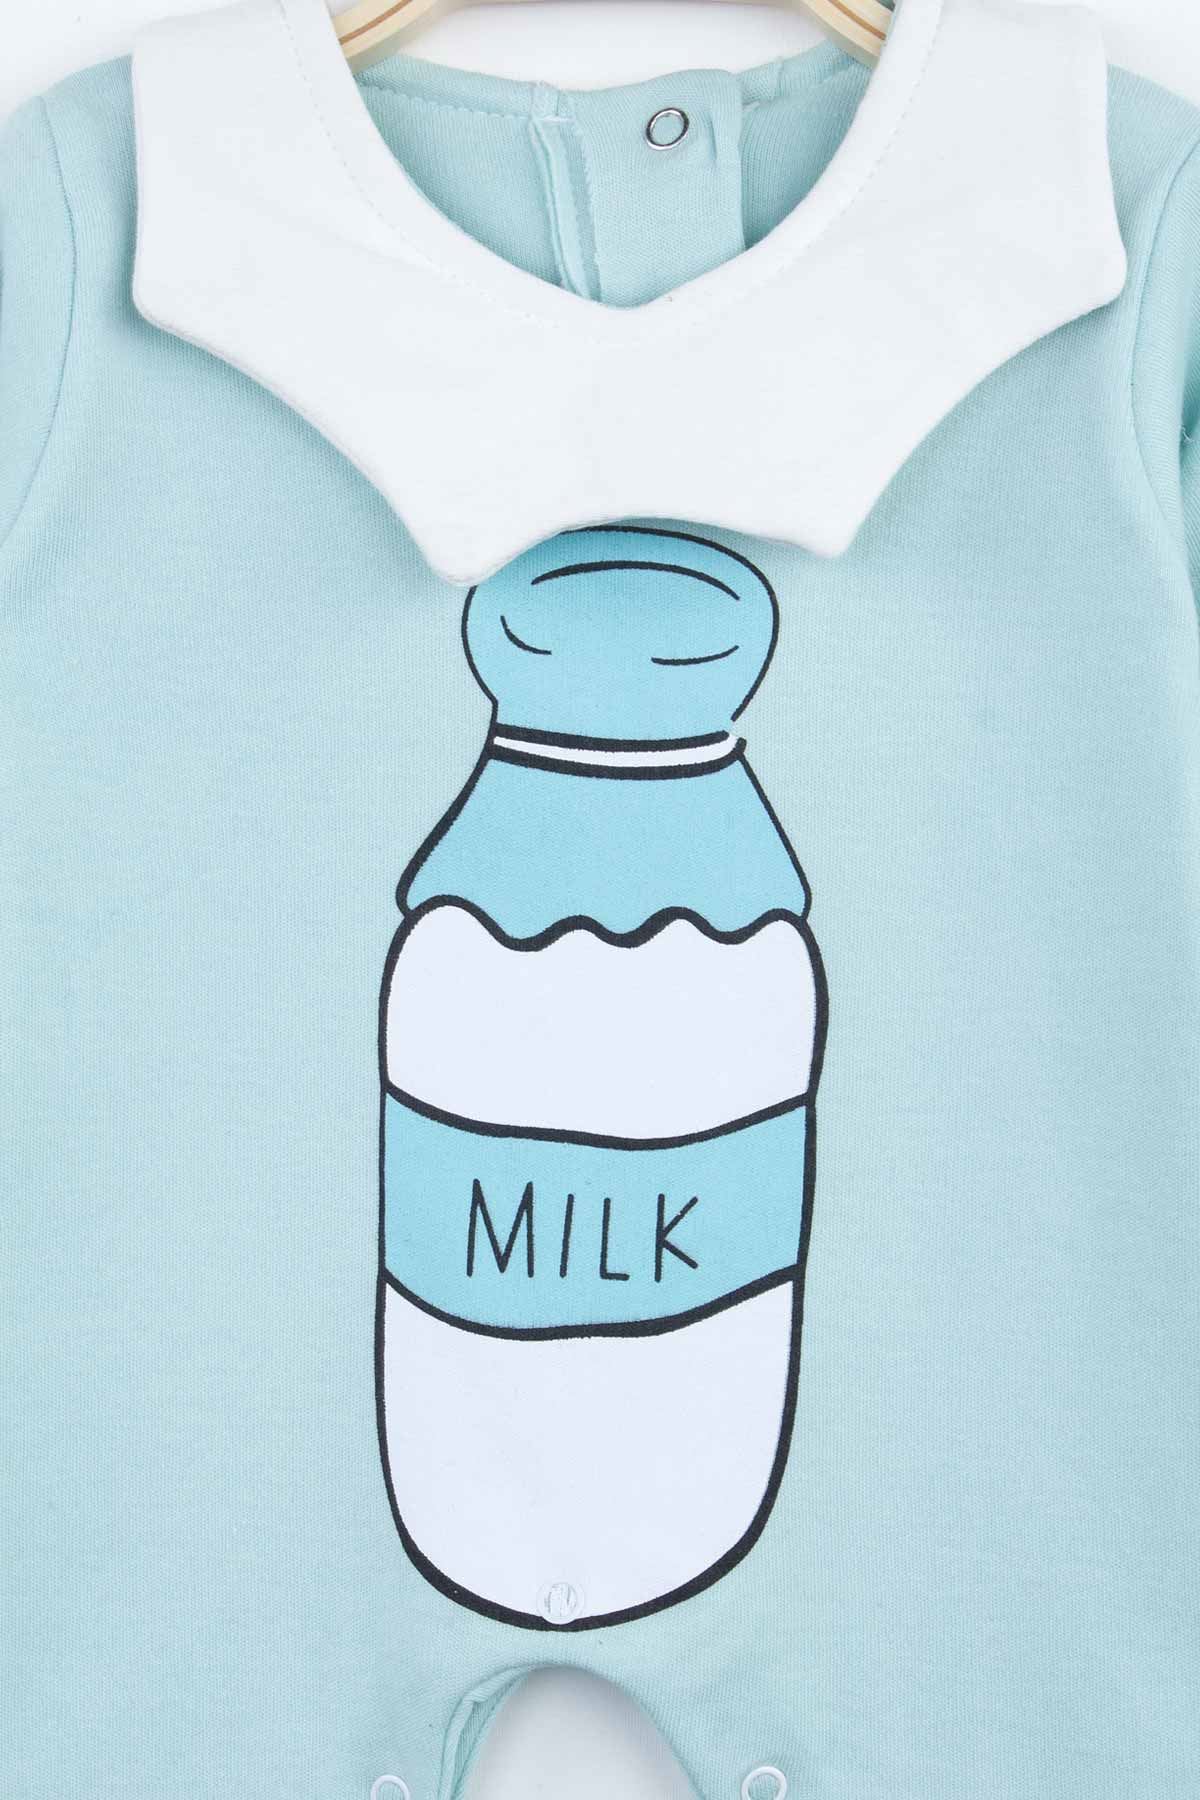 Green Milk Baby Boy Rompers Fashion 2021 New Season Style Babies Clothes Outfit Cotton Comfortable Underwear for Boys Baby Models